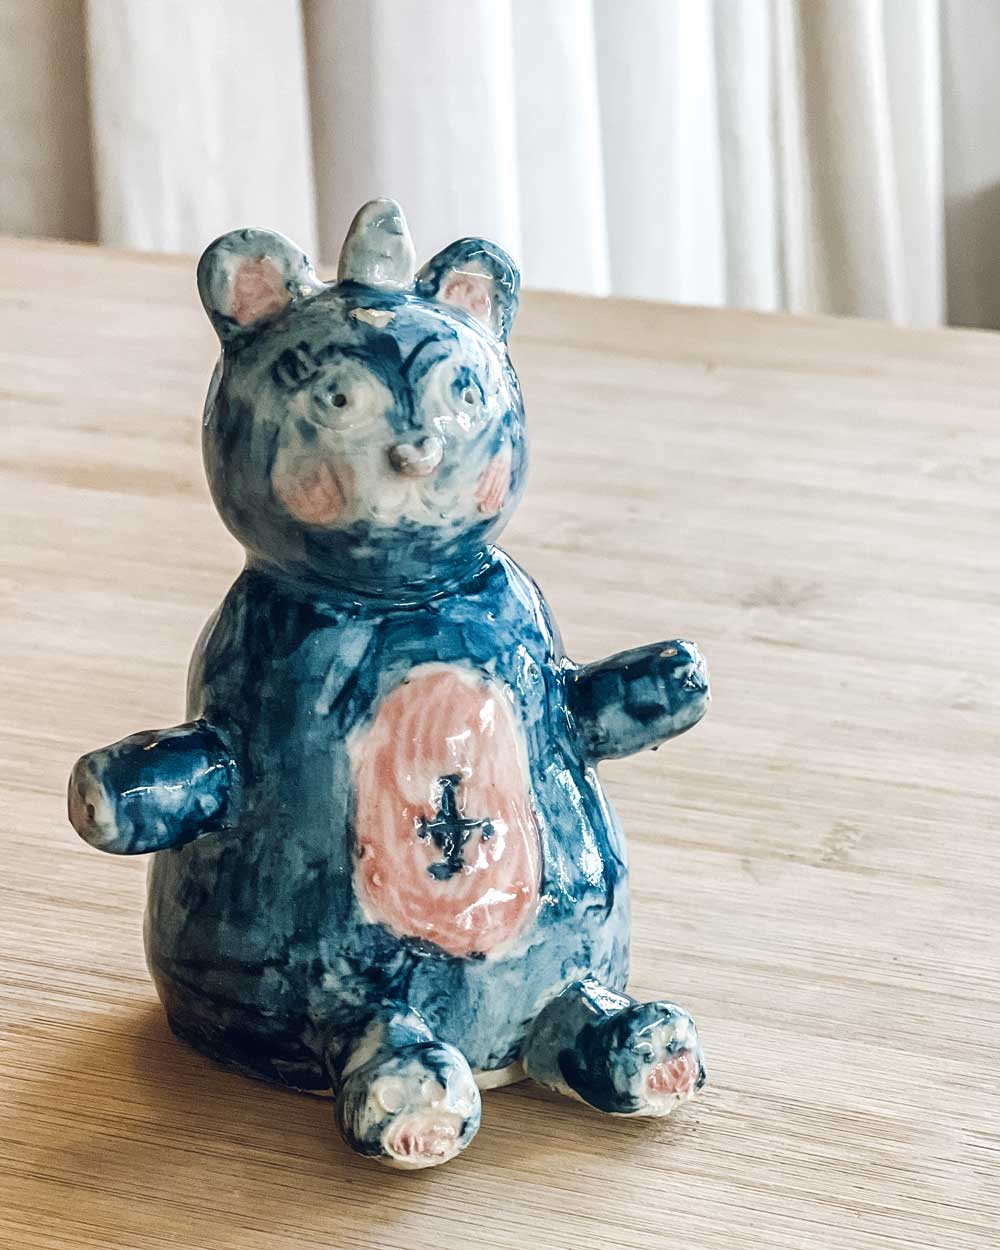 Kids Clay Workshop – Tuesday, October 3